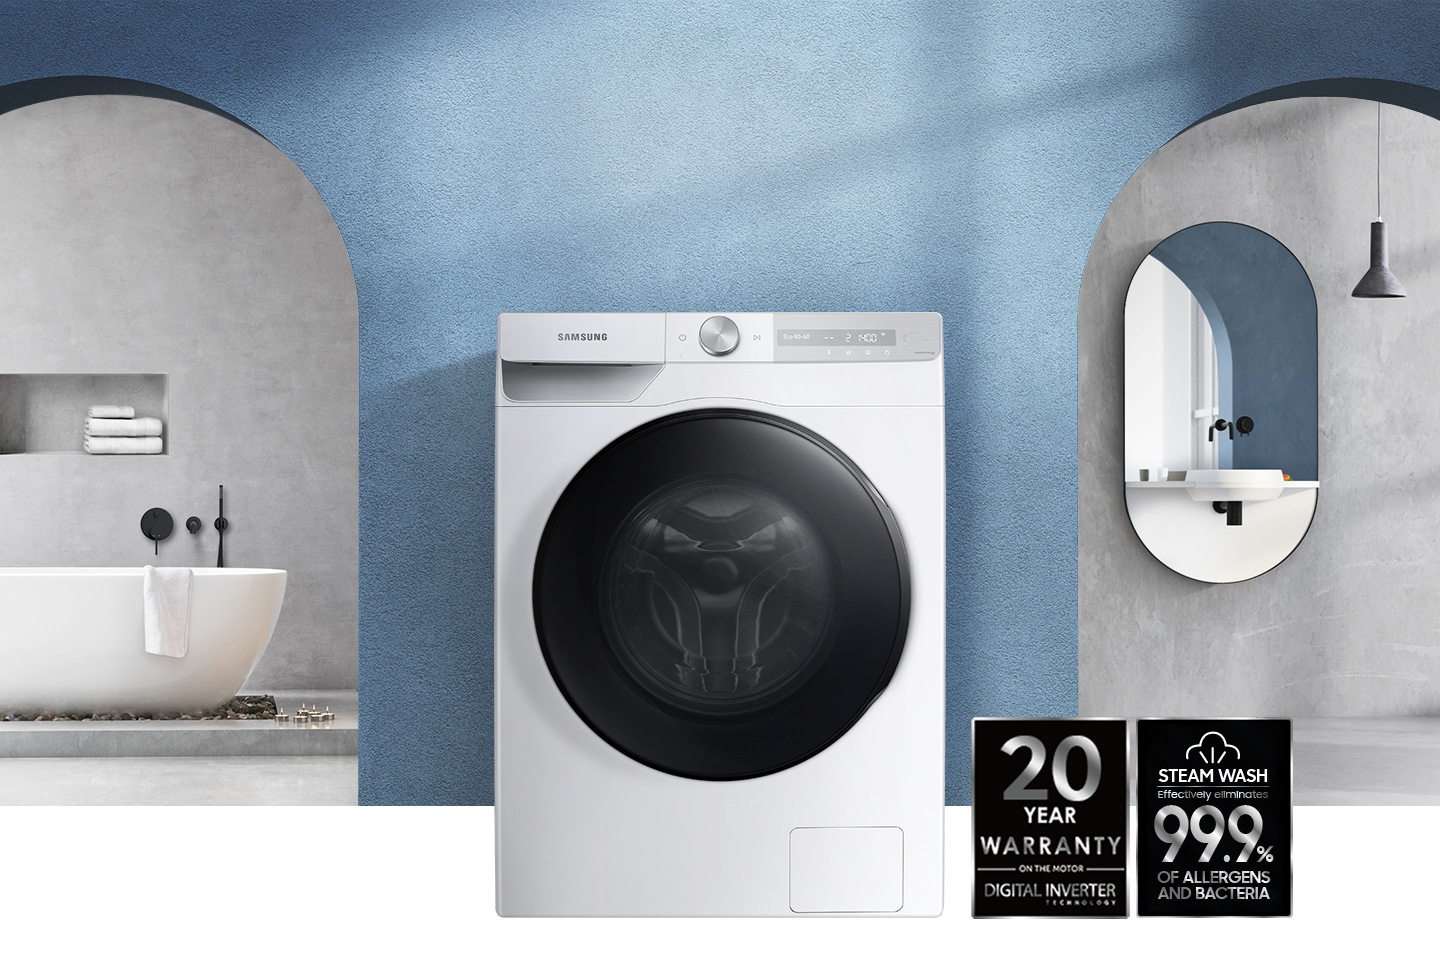 WW7400T features efficient clean, intelligent wash. It has Top level of energy efficiency, 10 year warranty on the DIT motor and effectively eliminates 99.9% of allergens and bacteria with steam wash. Eco Bubble saves energy as create bubble efficiently with less energy. Quick Drive is Time saving function which half the wash time up to 50%. AI control intuitively displays and personalizes wash cycles.